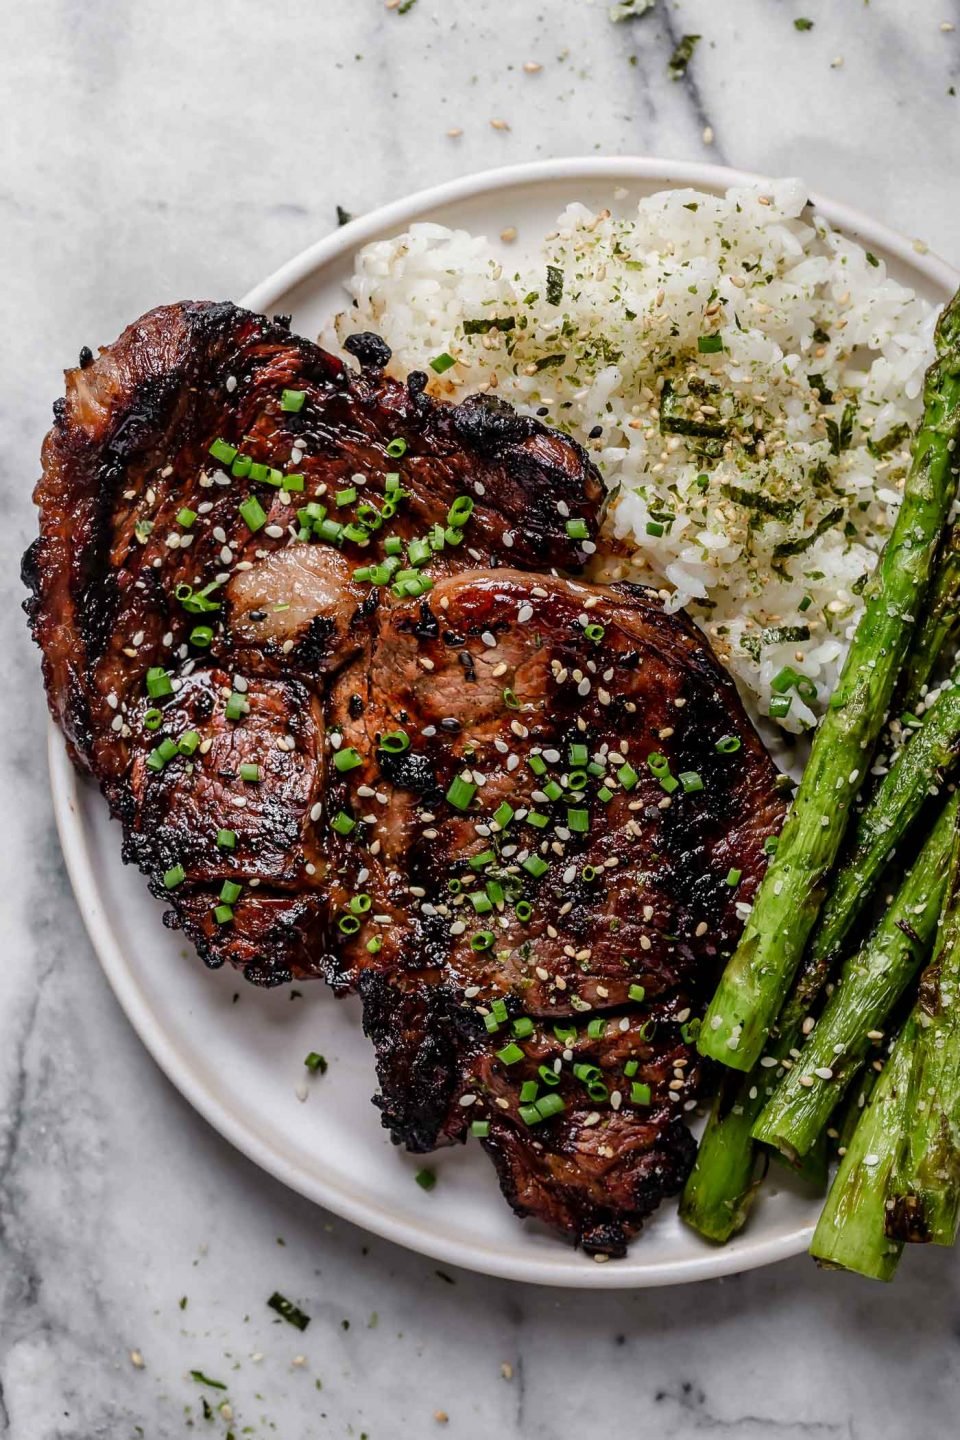 Grilled Teriyaki Ribeye Steaks shown on a white plate with seasoned sticky rice & grilled asparagus sits atop a gray and white marble surface. The ribeye has been marinated teriyaki & is garnished with freshly snipped chives & sesame seeds.